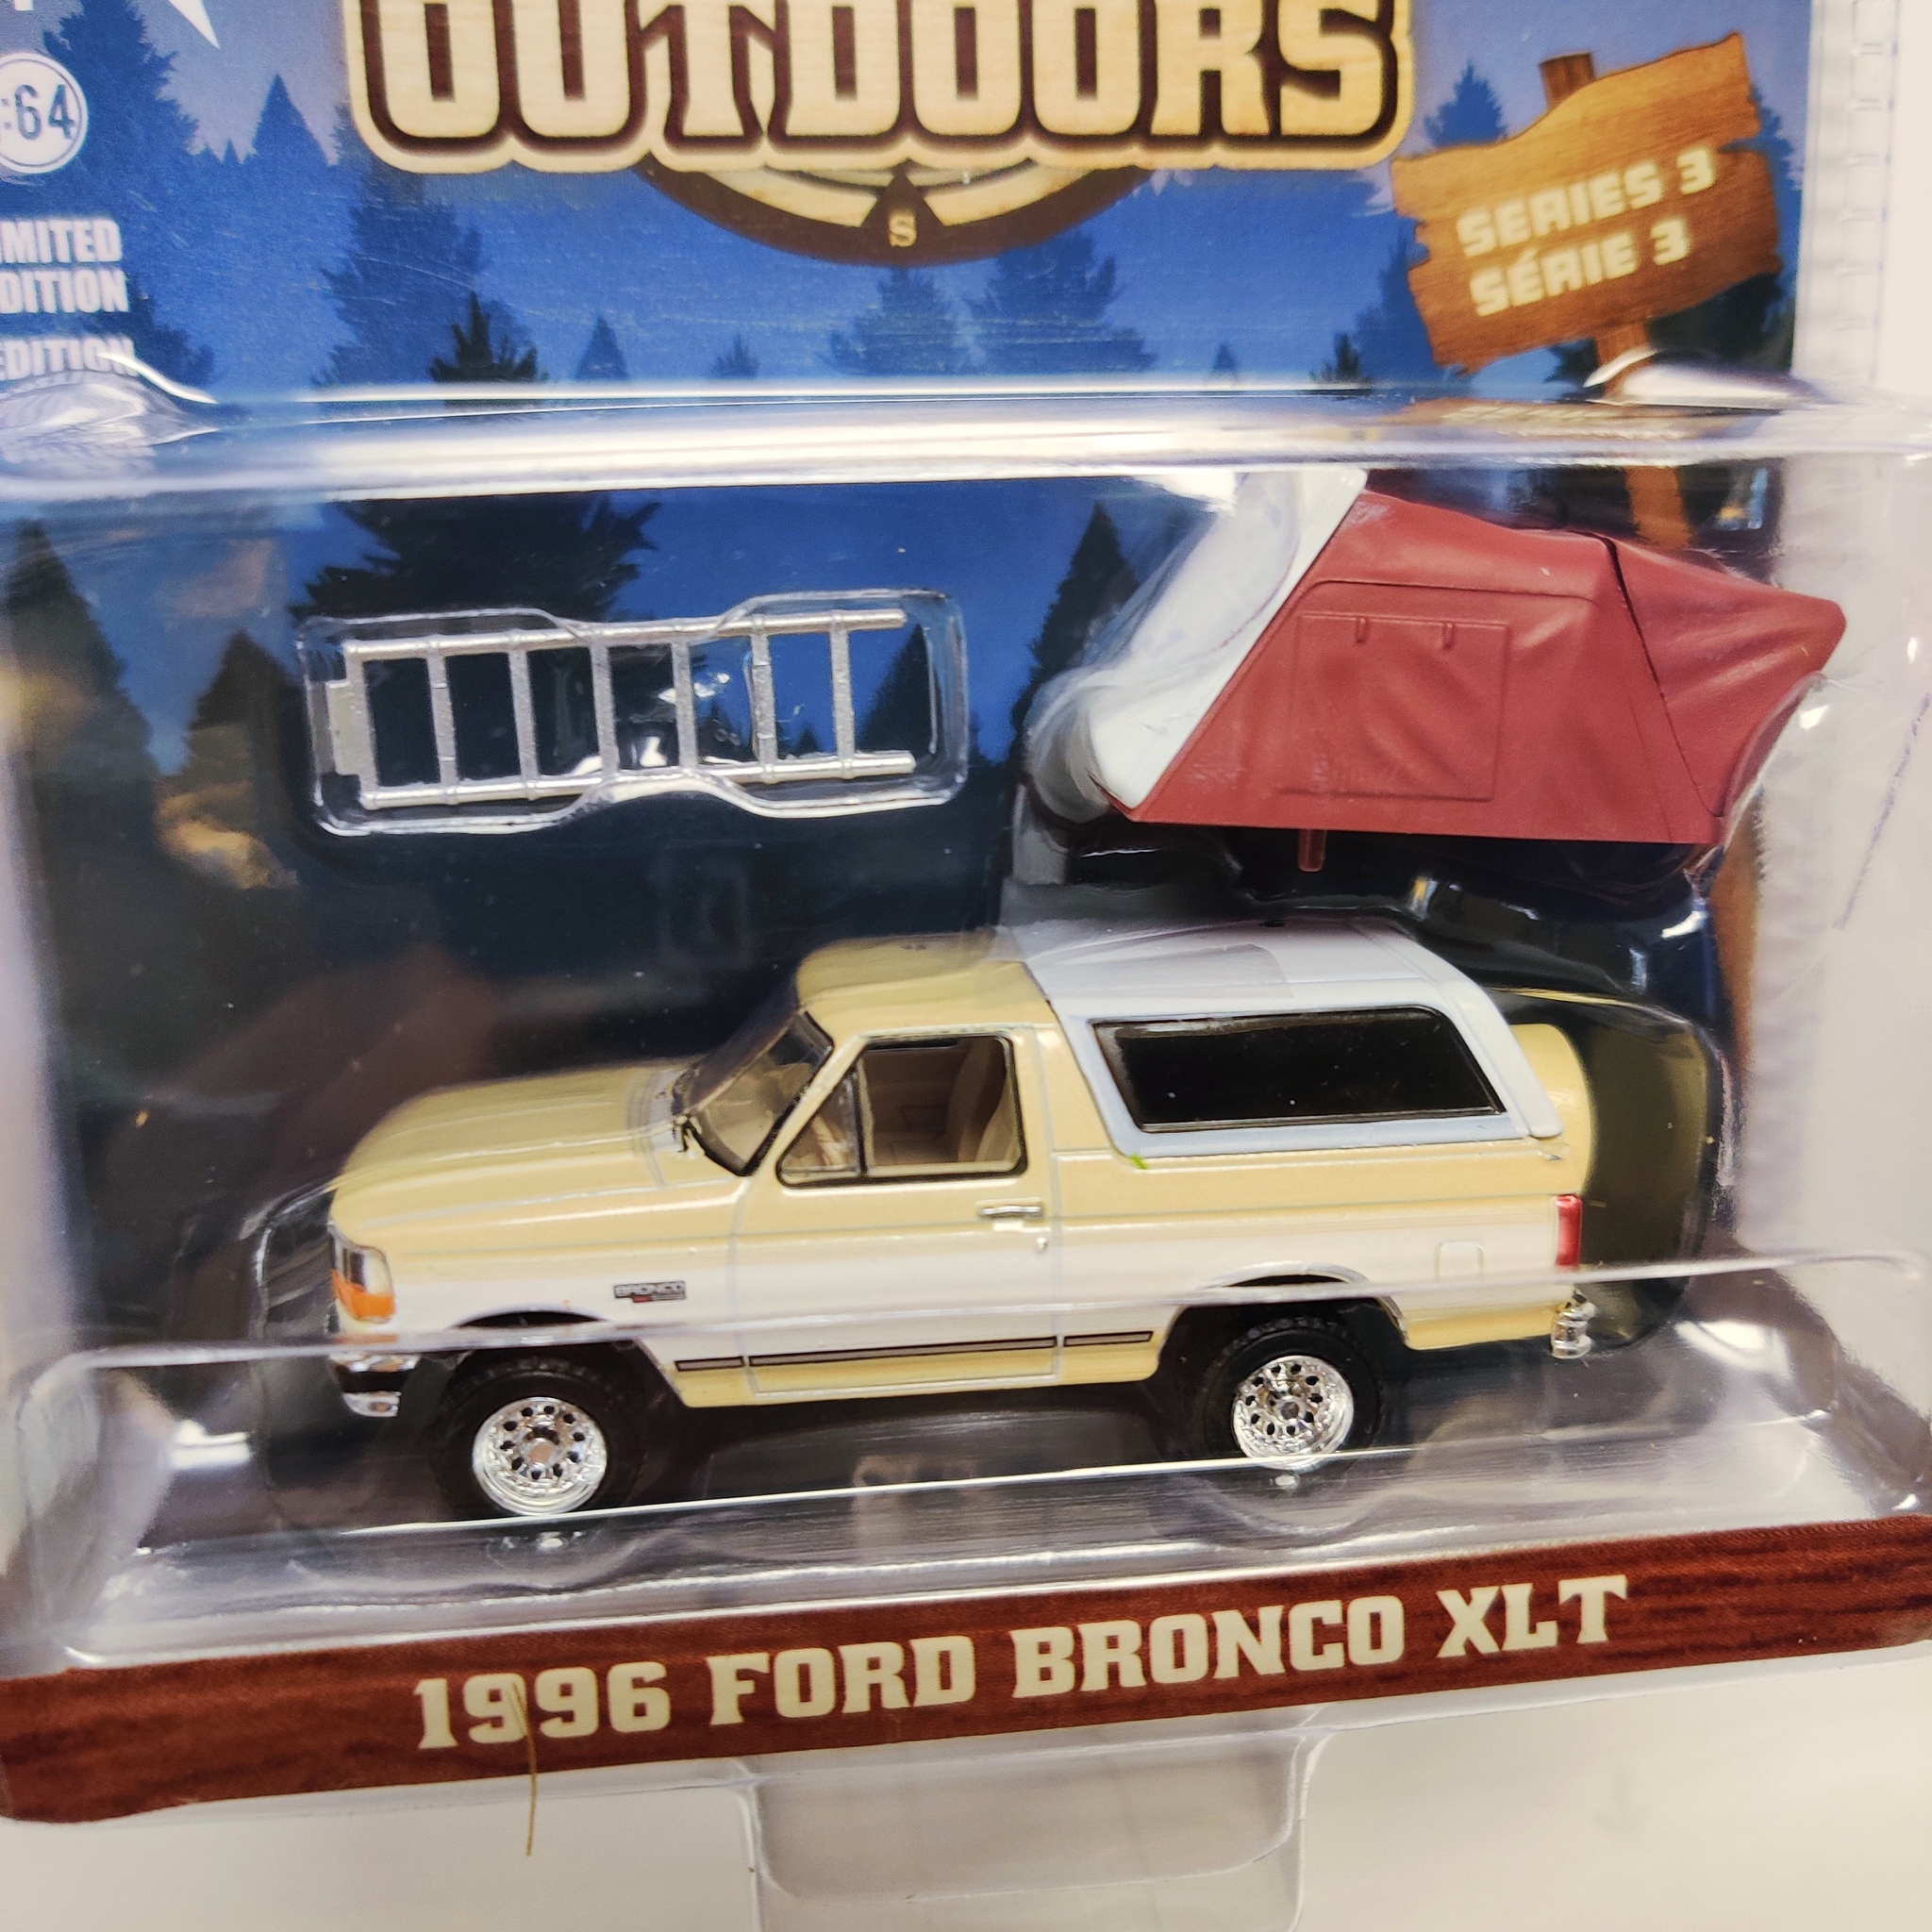 Skala 1/64 Greenlight "The Great Outdoors" 1996 Ford Bronco XLT